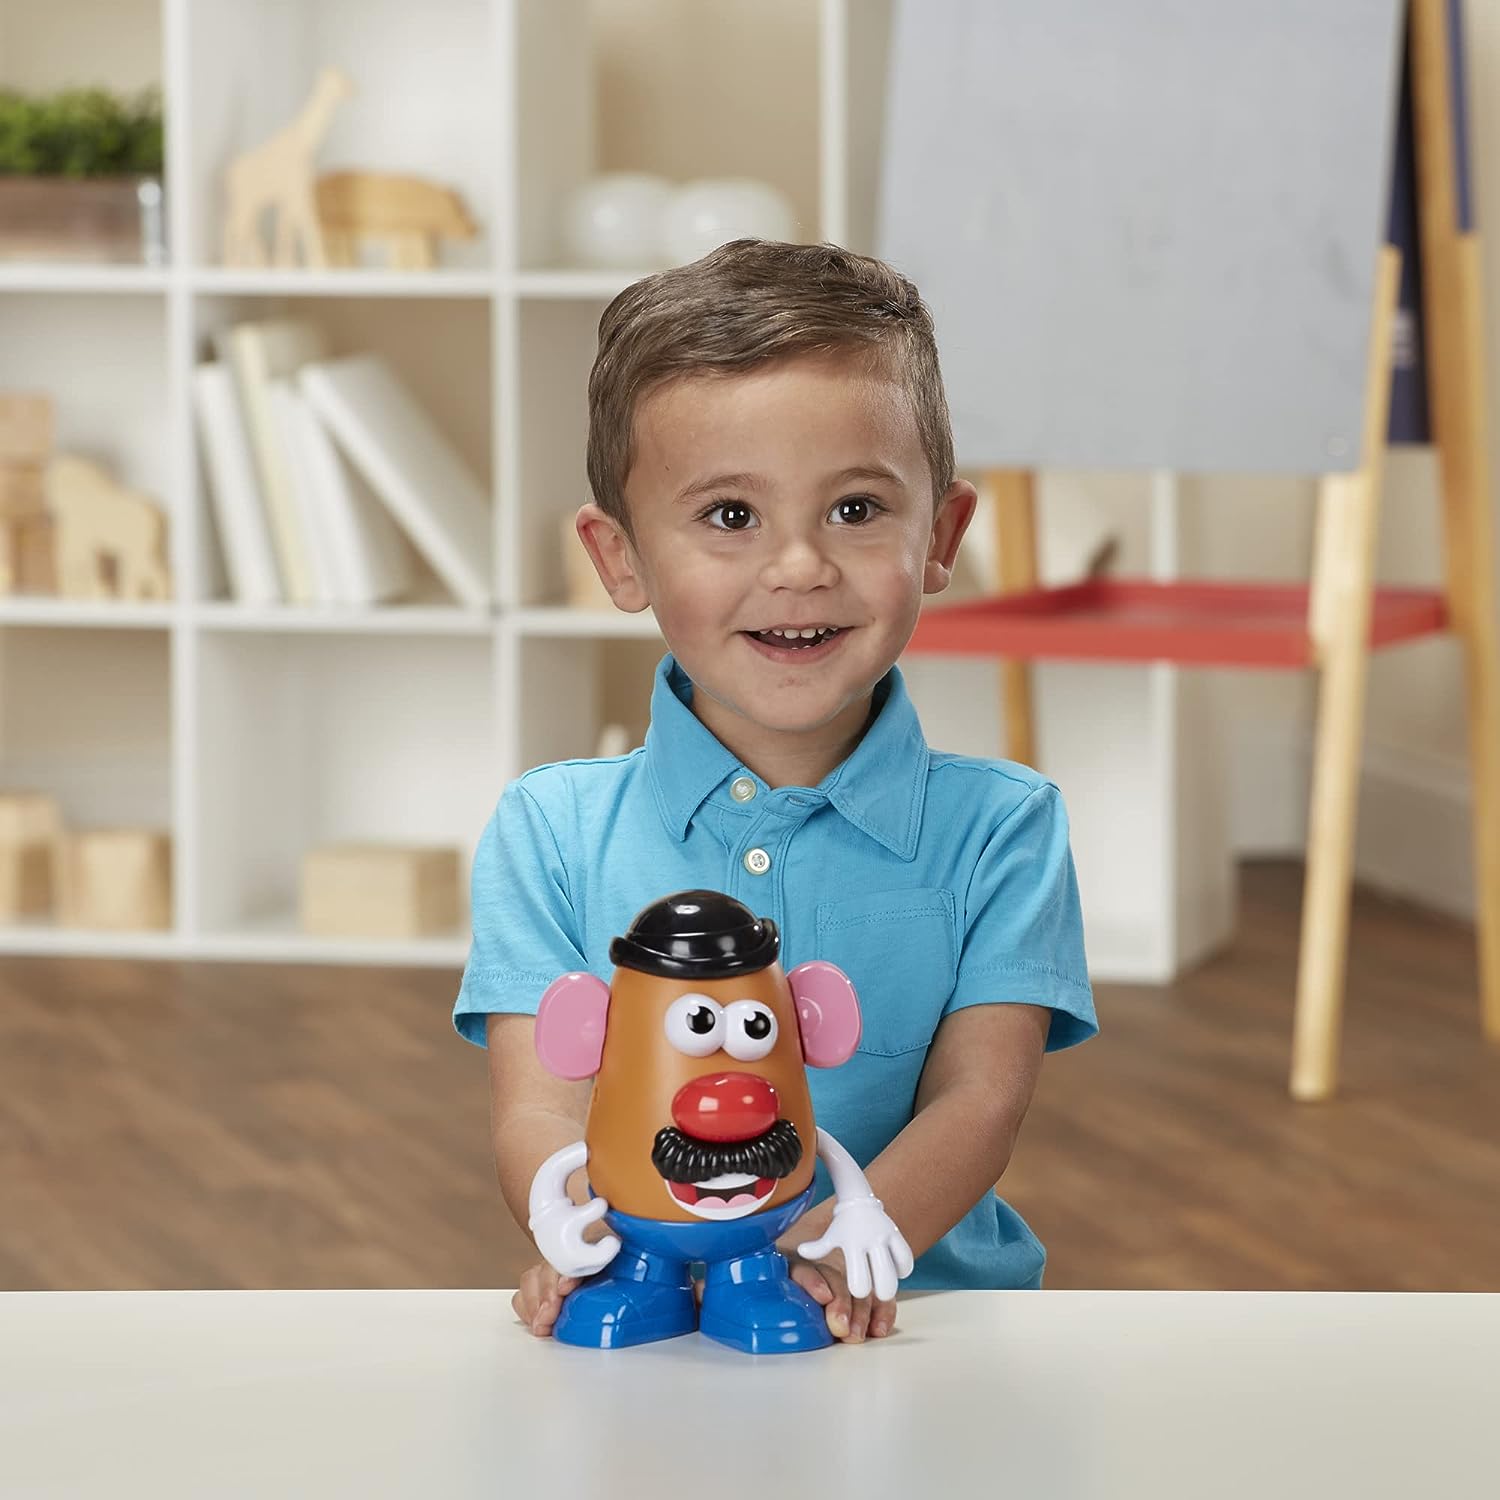 Mr Potato Head Classic Toy For Kids Ages 2 and Up,Includes 13 Parts and Pieces to Create Funny Faces